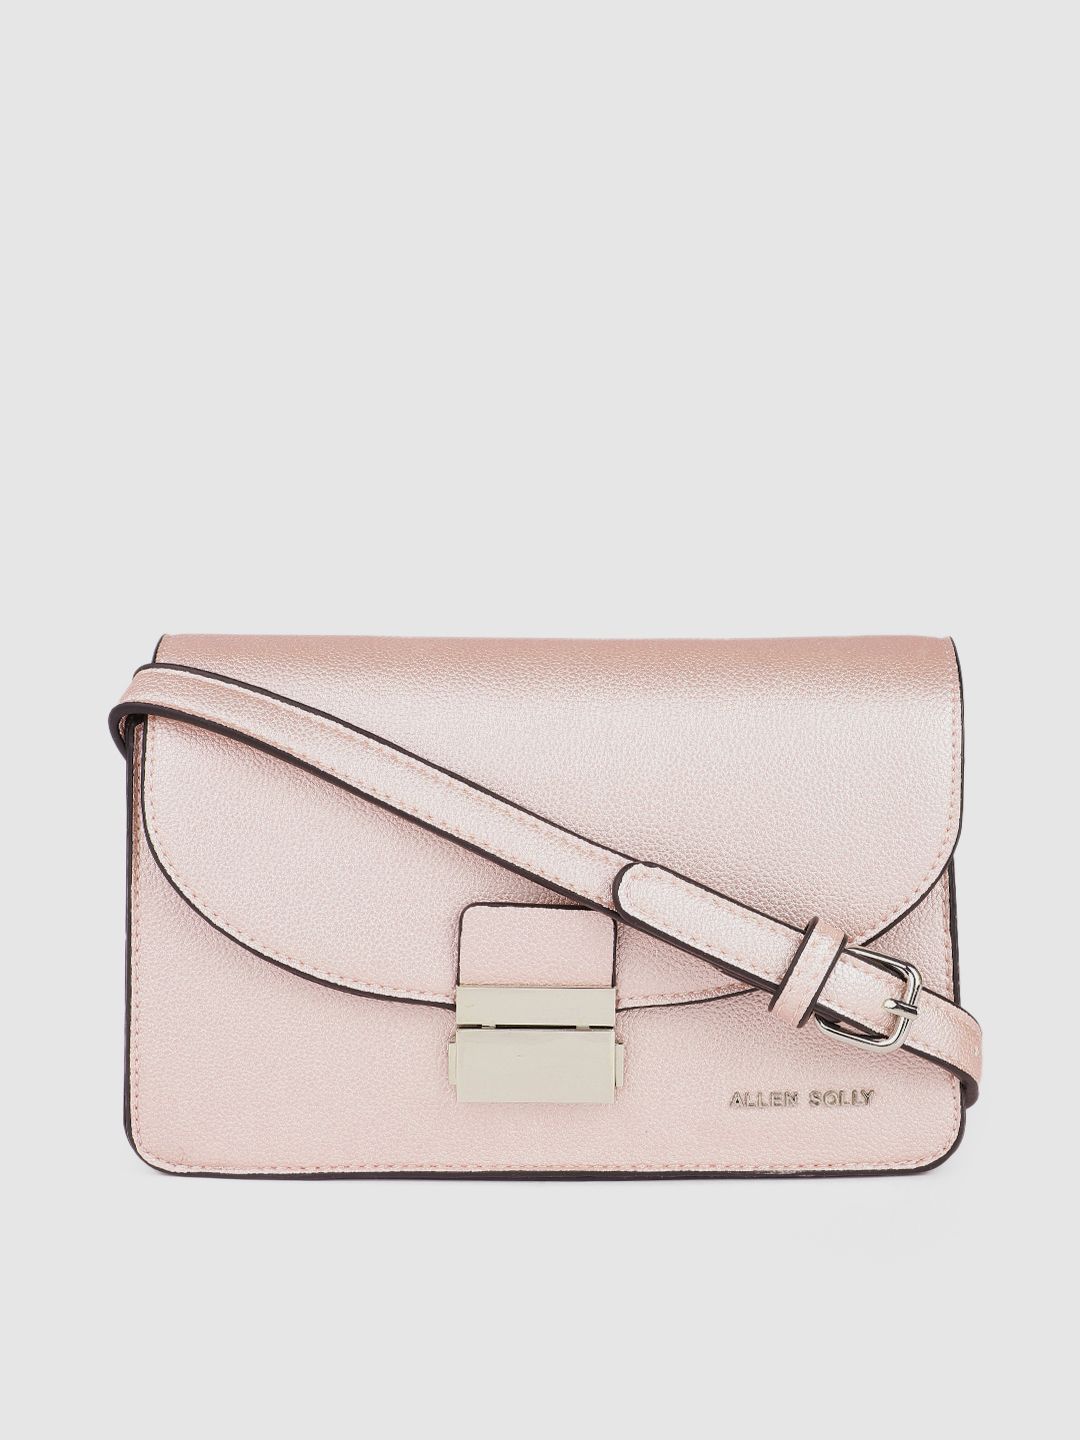 Allen Solly Metallic Pink-Toned PU Structured Sling Bag Price in India